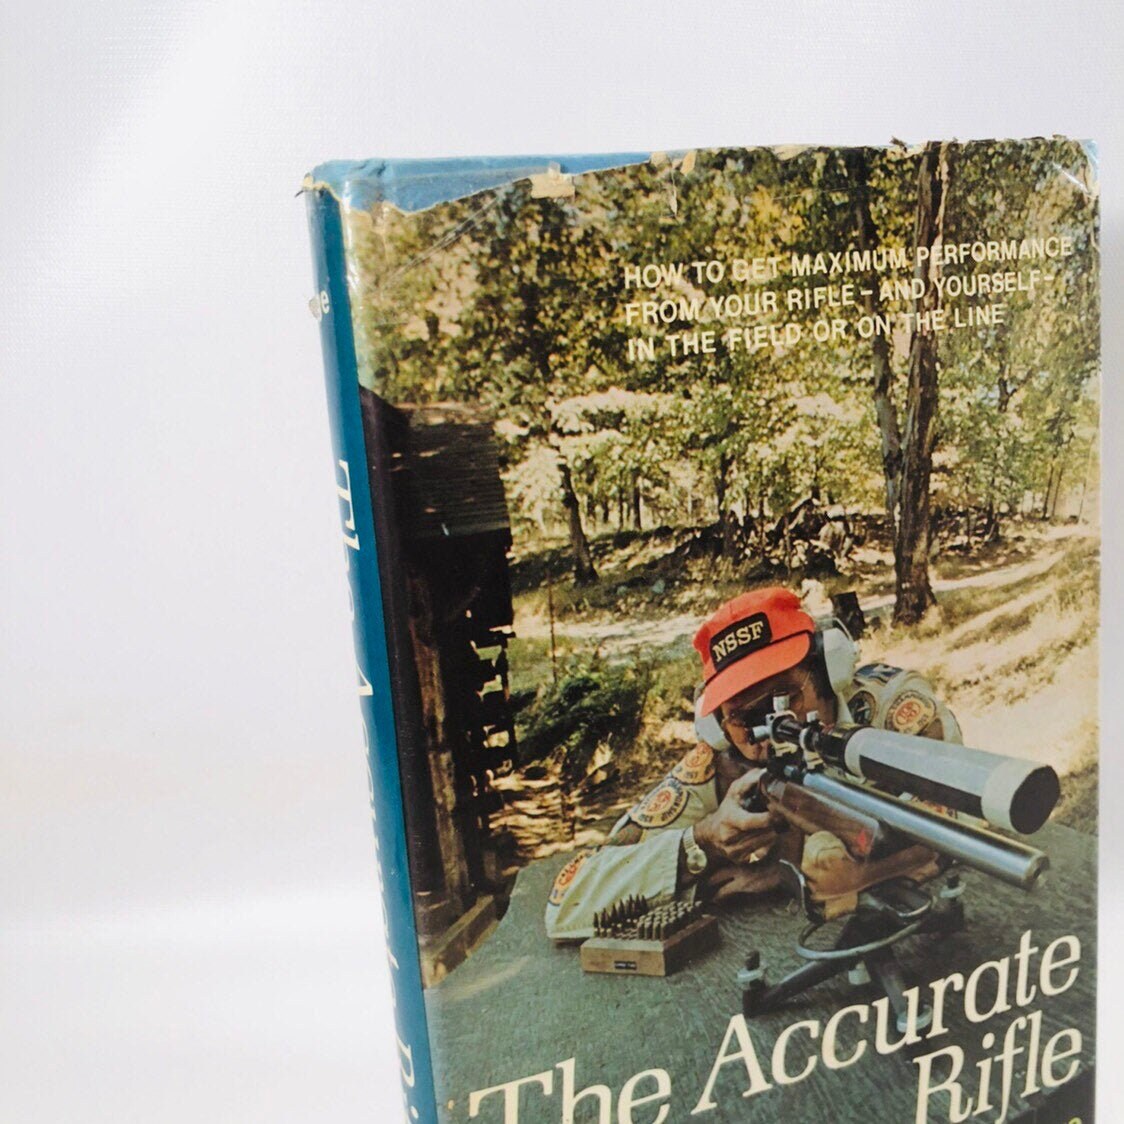 The Accurate Rifle by Warren Page 1973 A Vintage Book Vintage Book